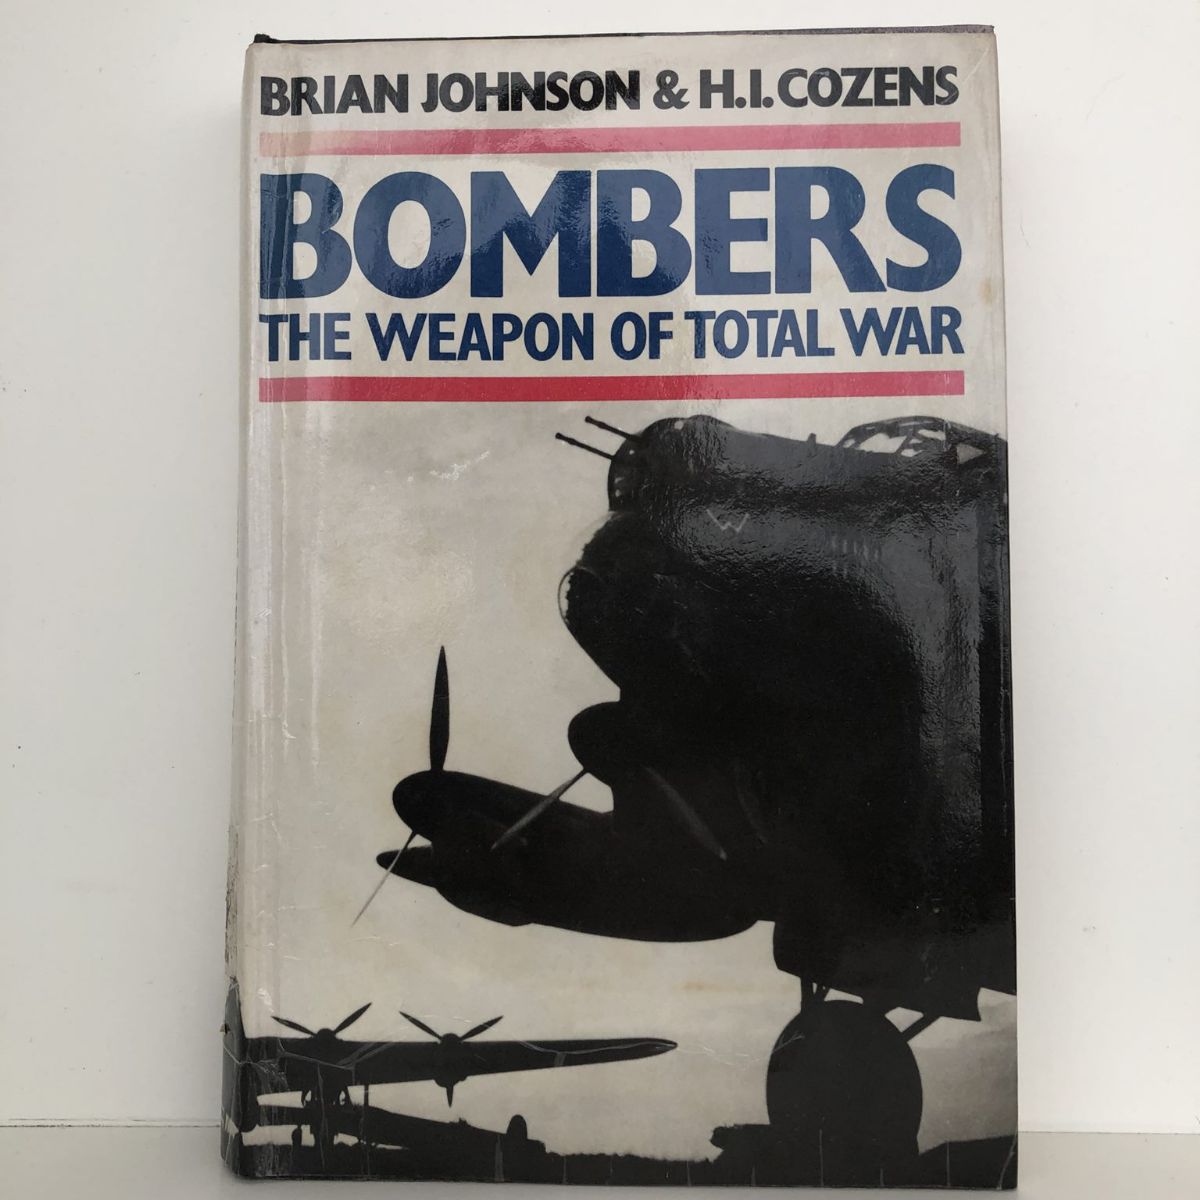 BOMBERS: The Weapon of Total War